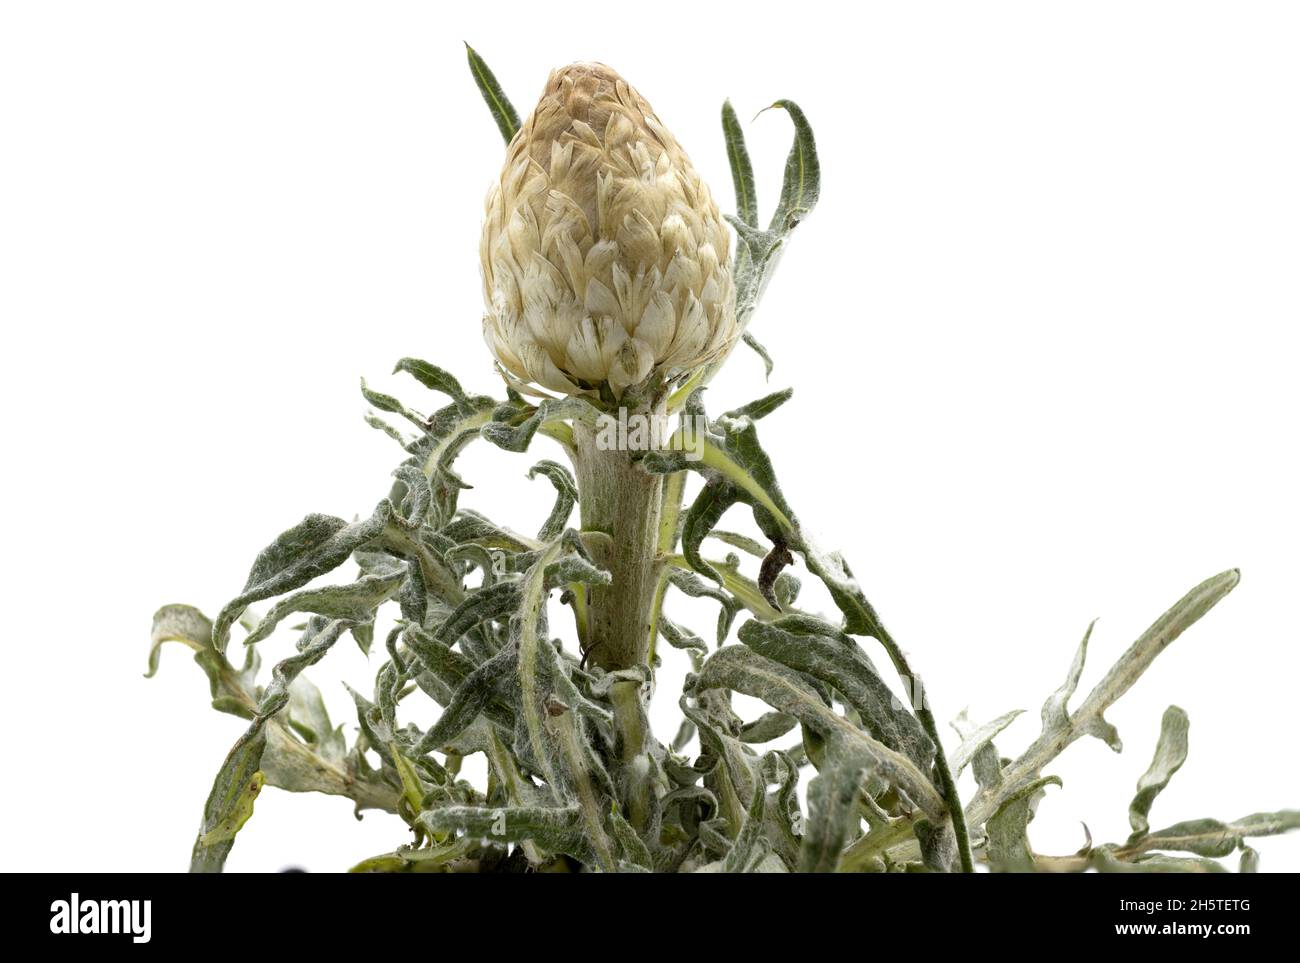 Herbal Flower and Plant, Rhaponticum Carthamoides or Maral Root Plant, Used in Alternative and Folk Medicine Stock Photo